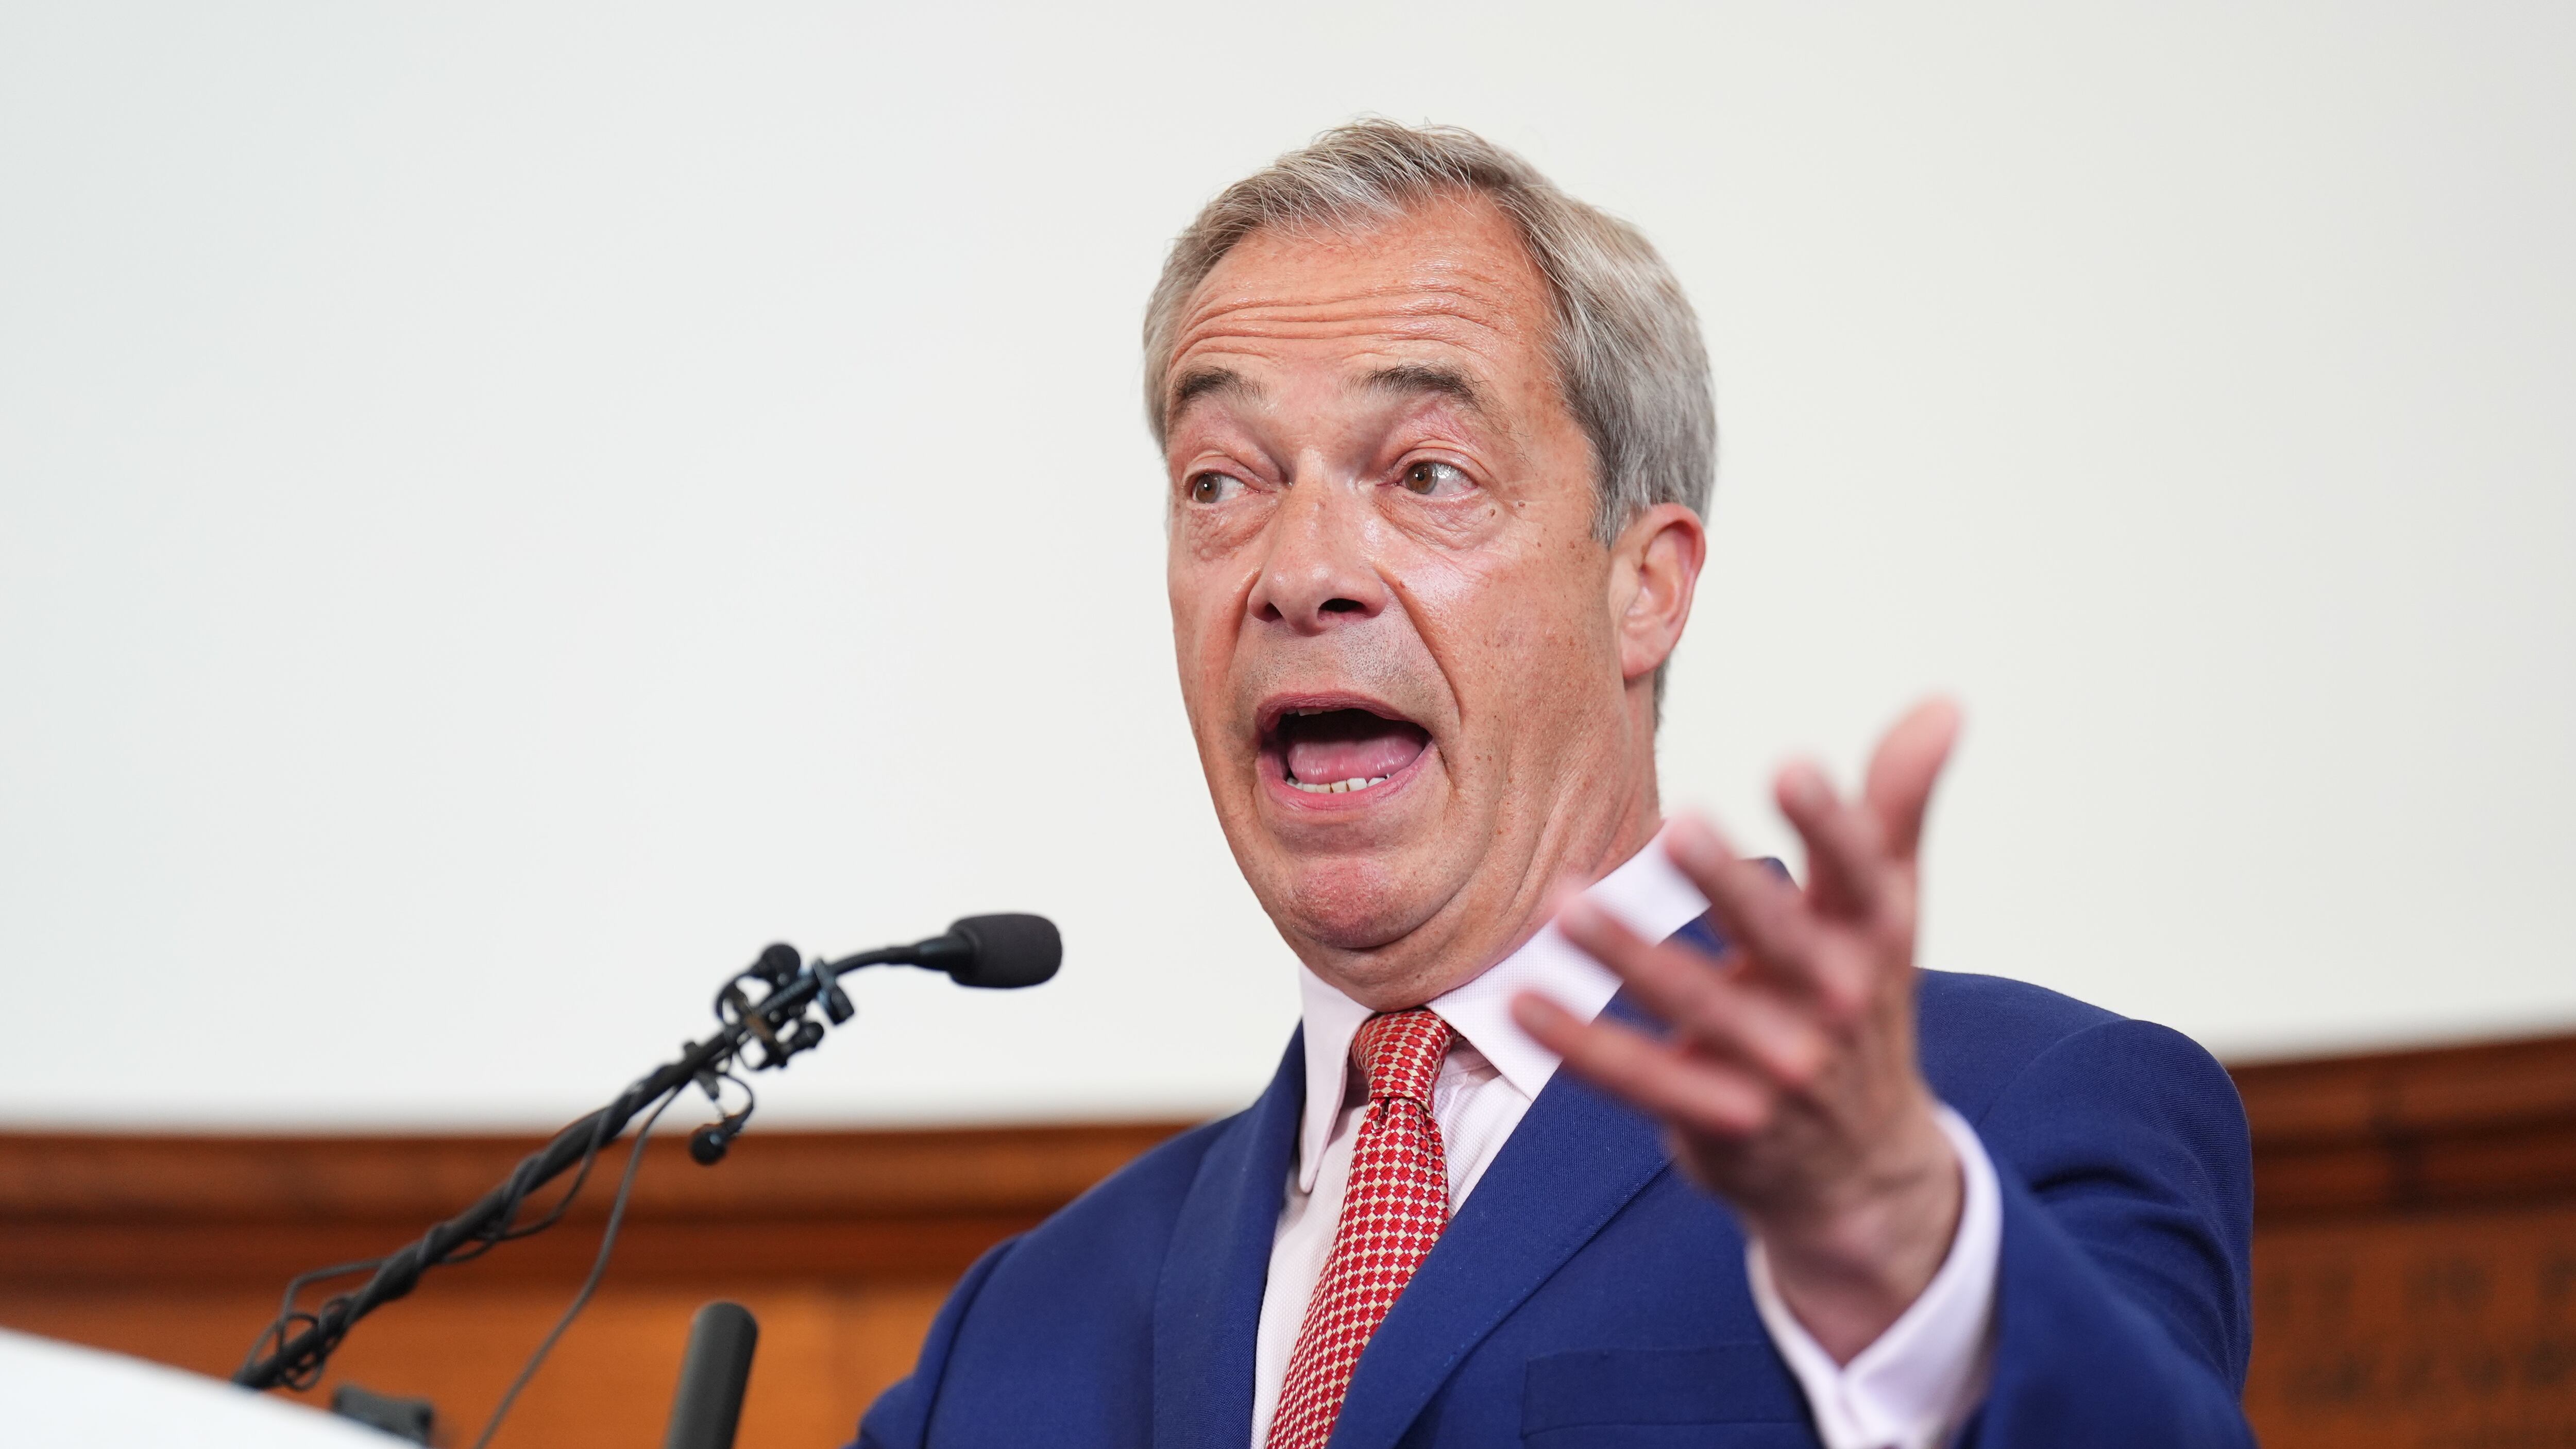 Leader Nigel Farage will set out the party’s policies at an event in Merthyr Tydfil, South Wales